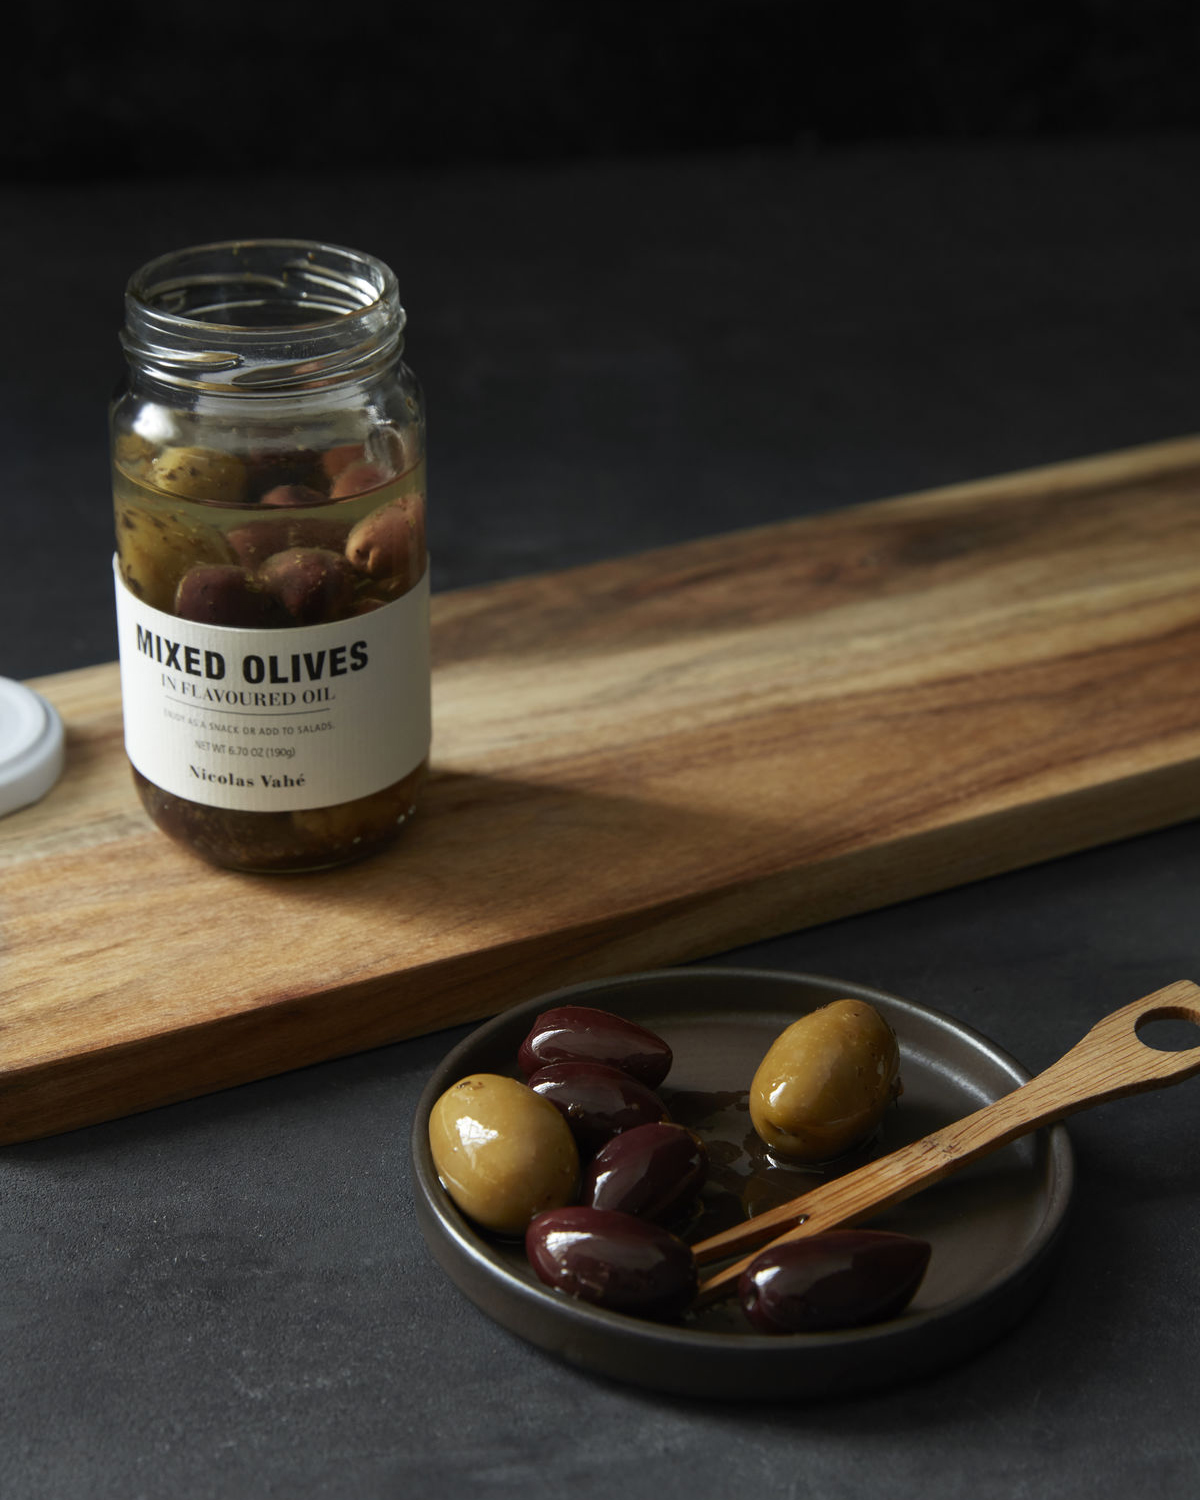 Mixed Olives, in flavoured oil, 190 g.